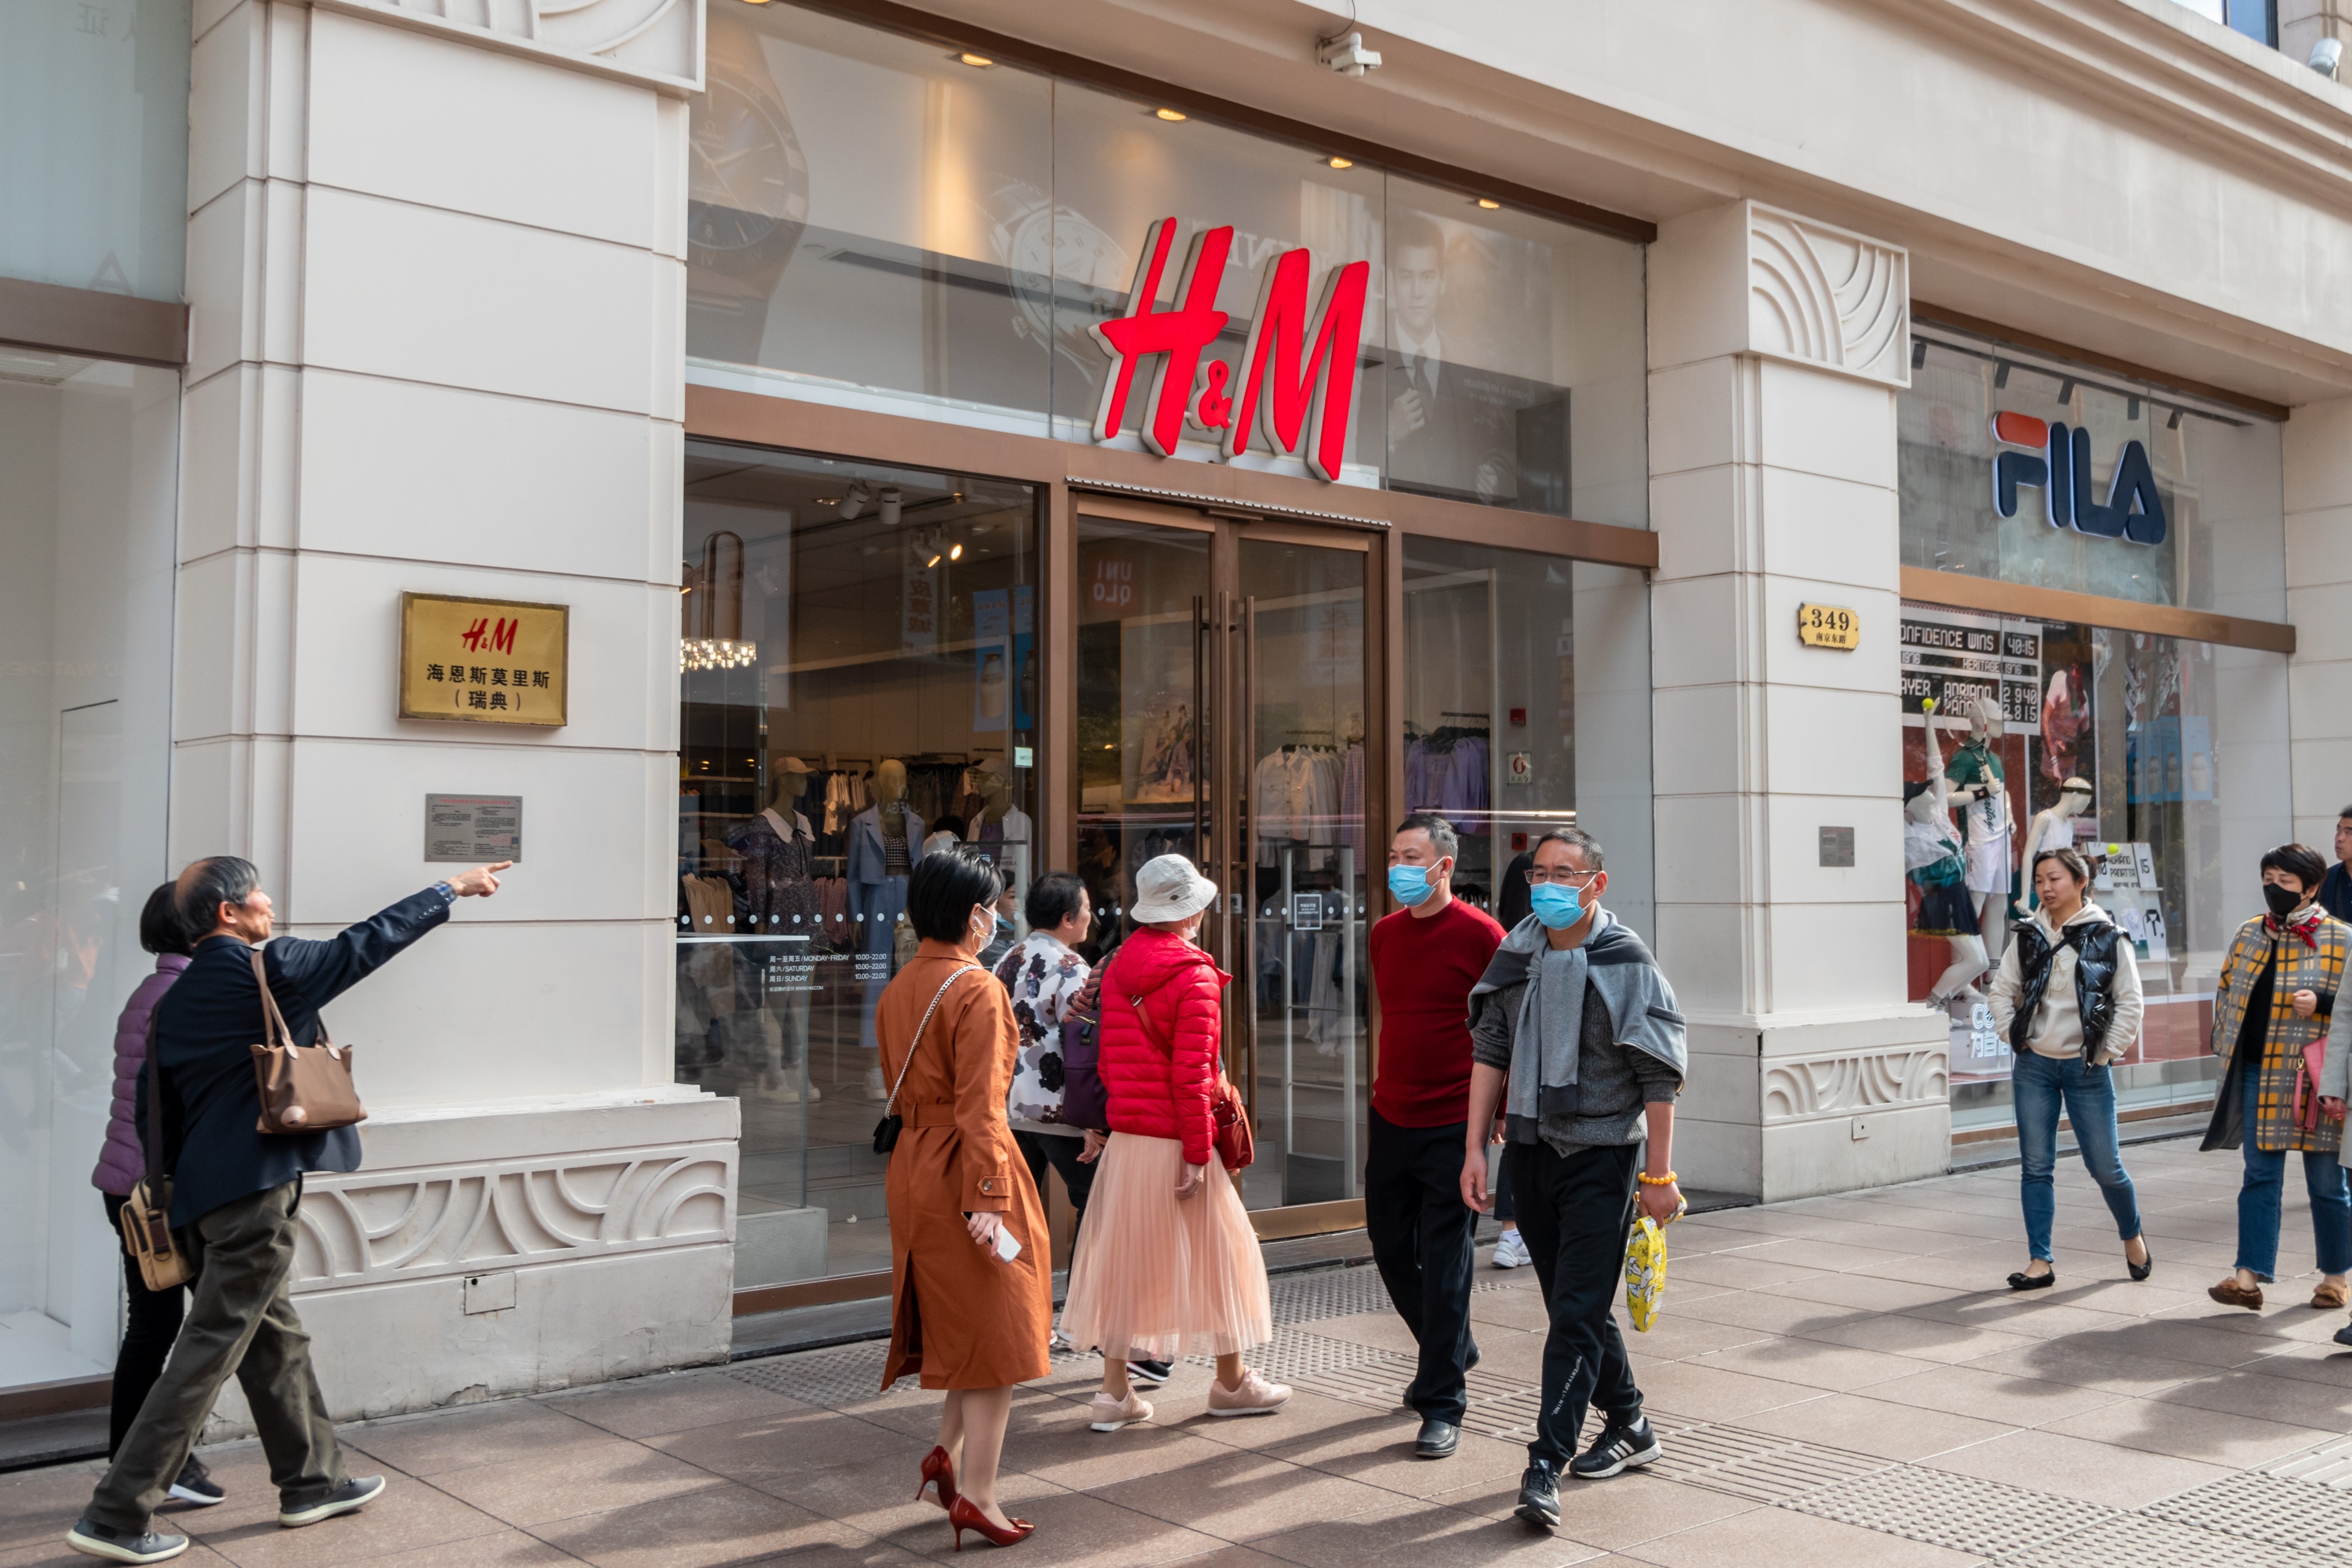 Citizens walk past an H&M store on Nanjing Road pedestrian street in Shanghai, China, March 24, 2021. Photo: Costfoto/Future Publishing via Getty Images